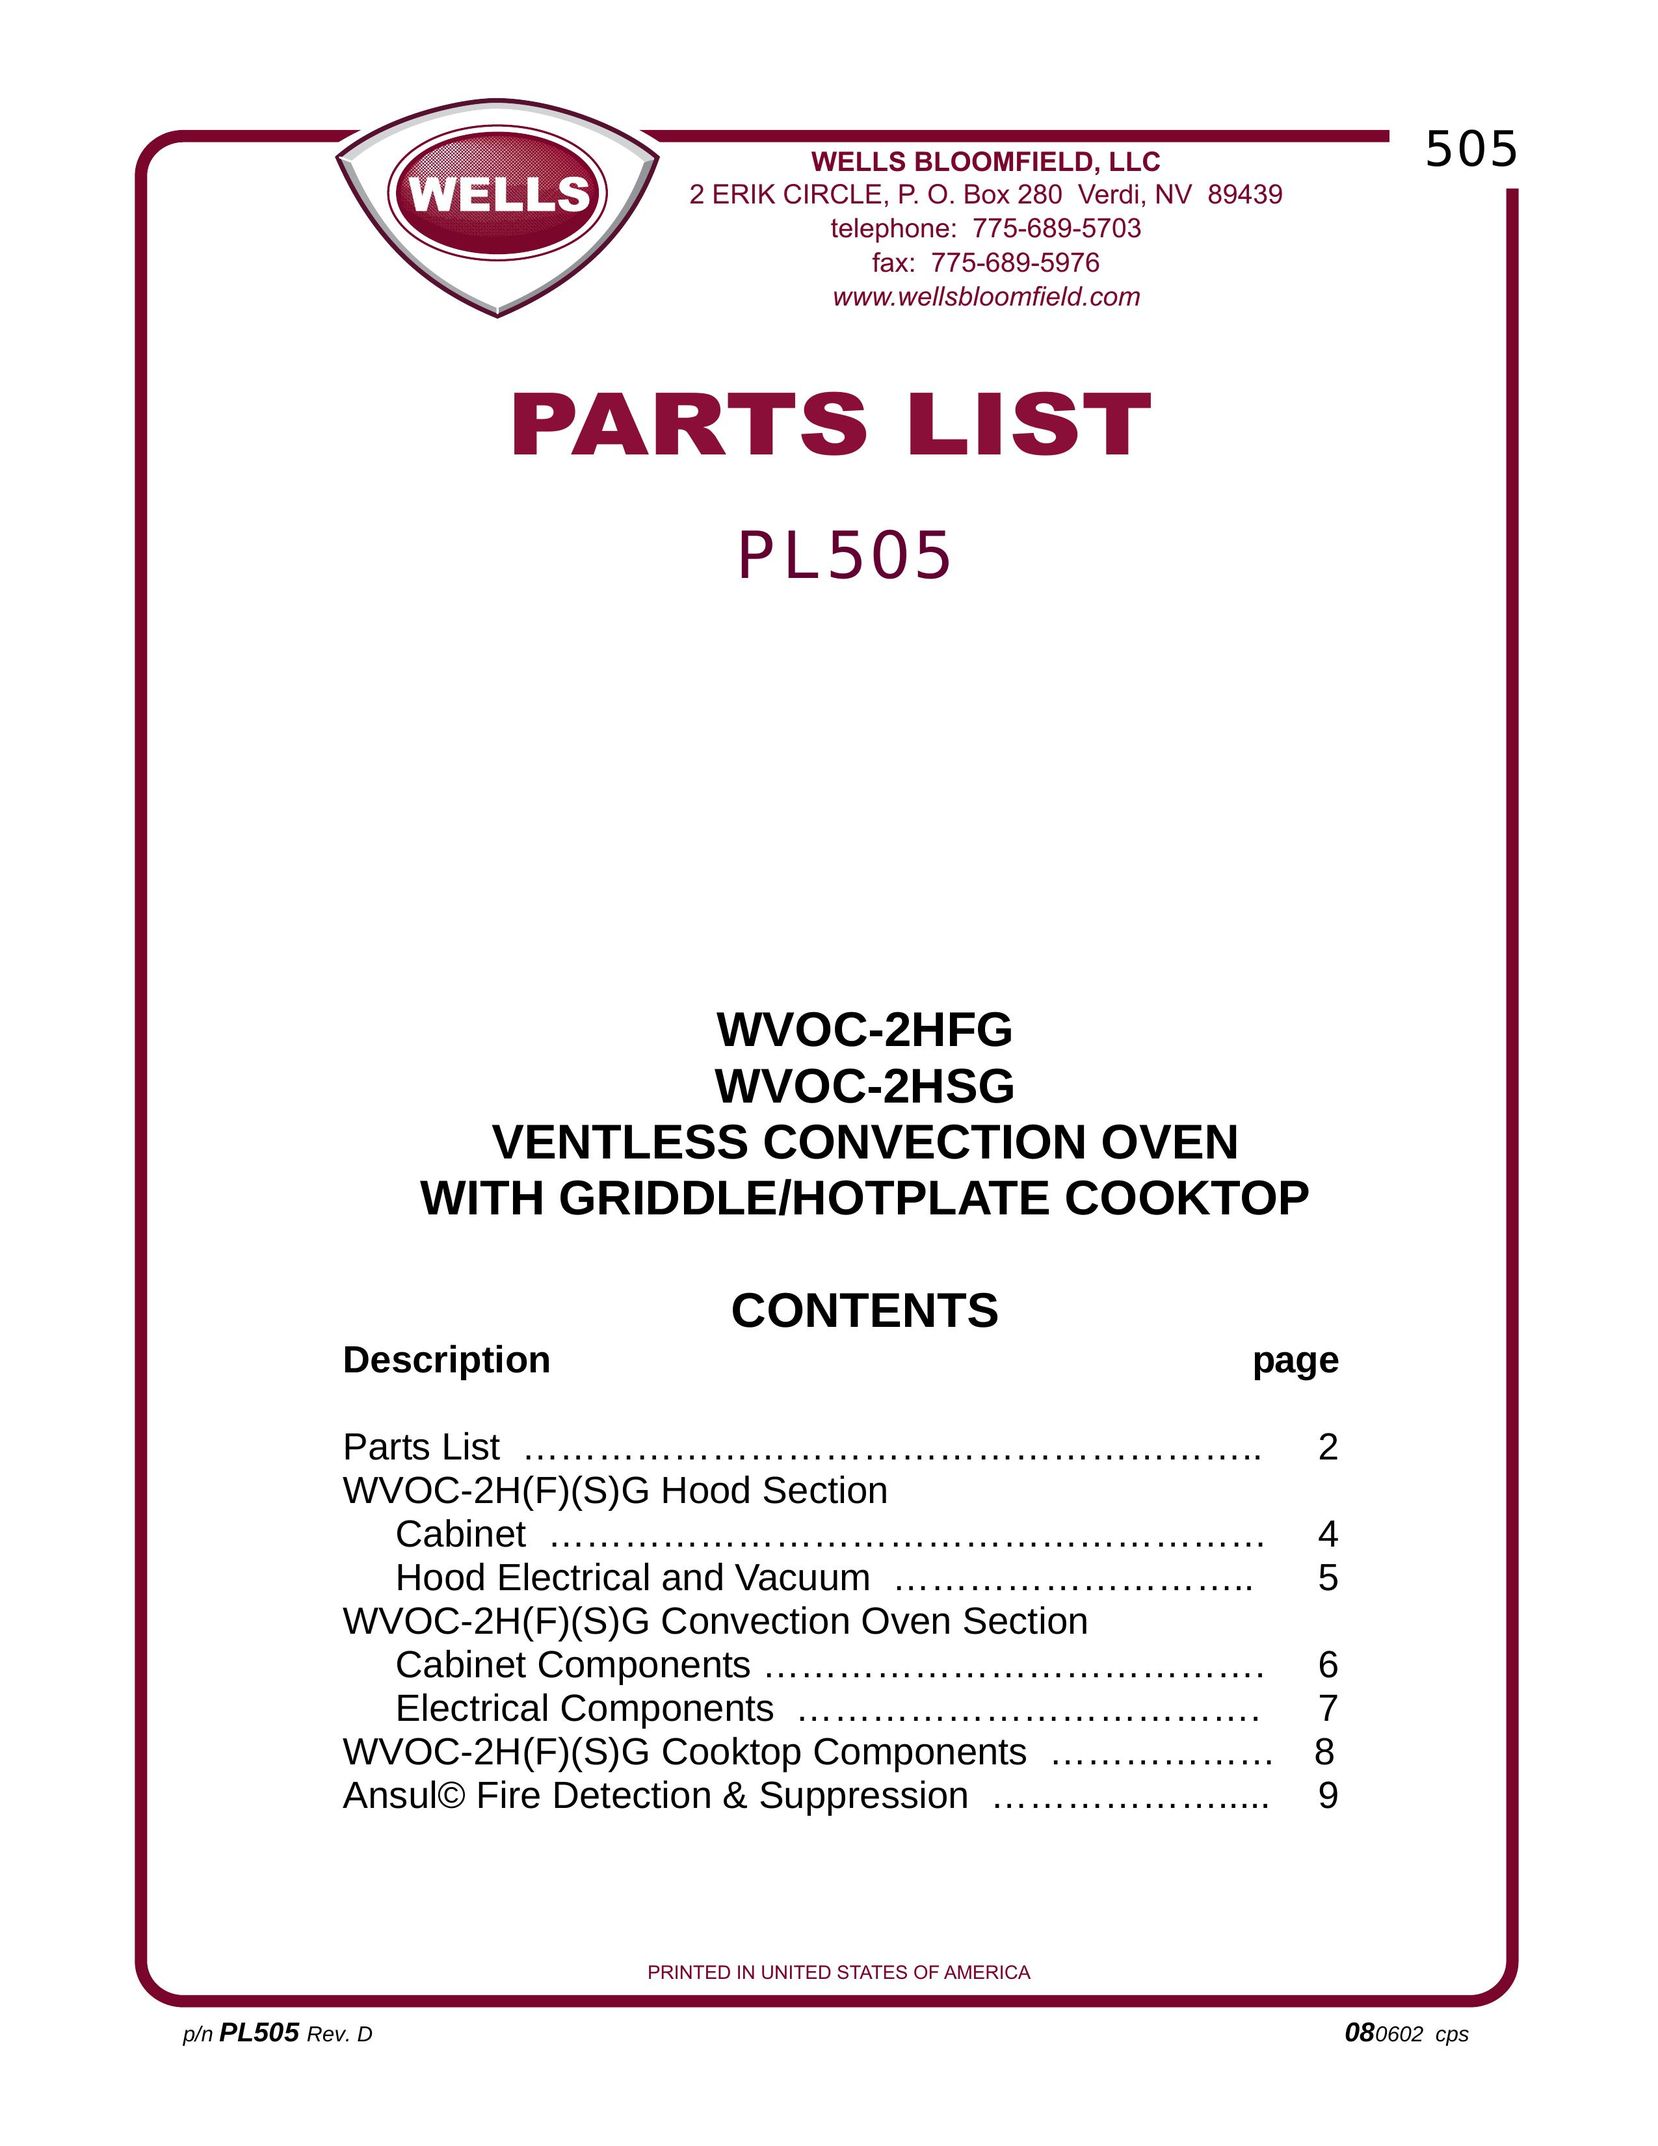 Wells WVOC-2HFG Convection Oven User Manual